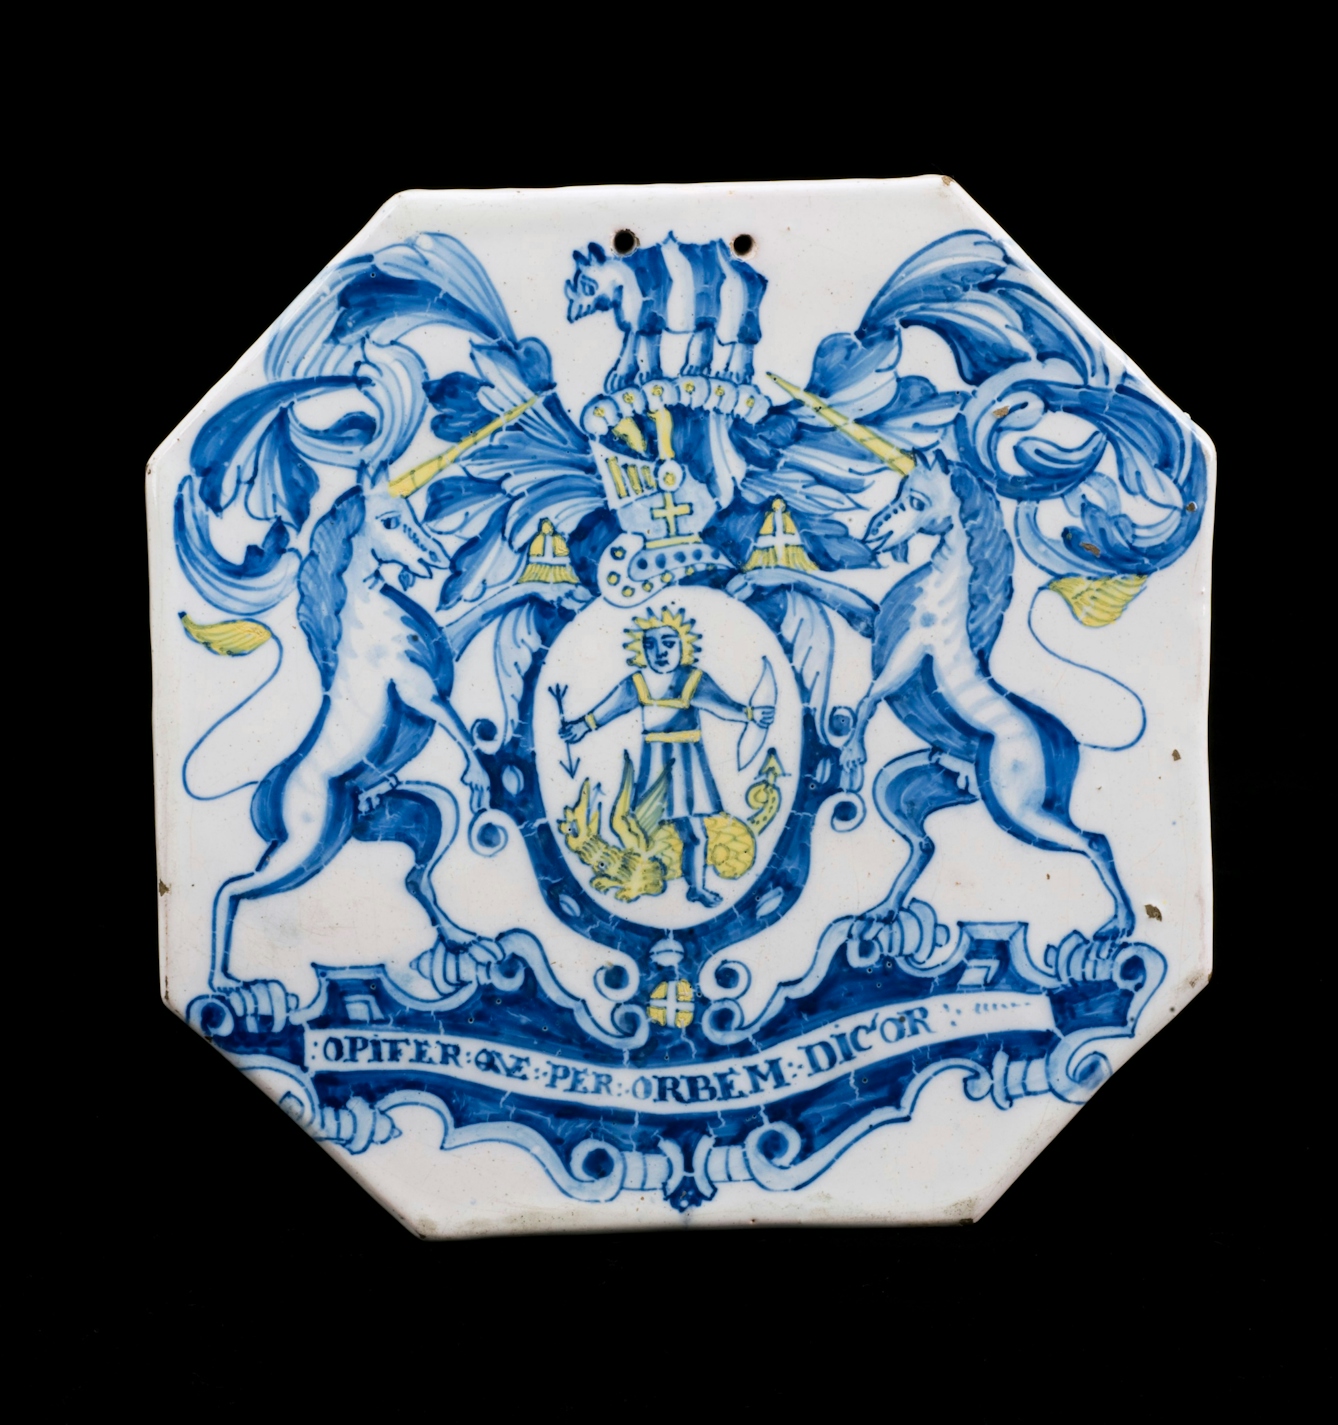 17th century octagonal pill tile featuring the coat of arms of the Royal Society of Apothecaries, London